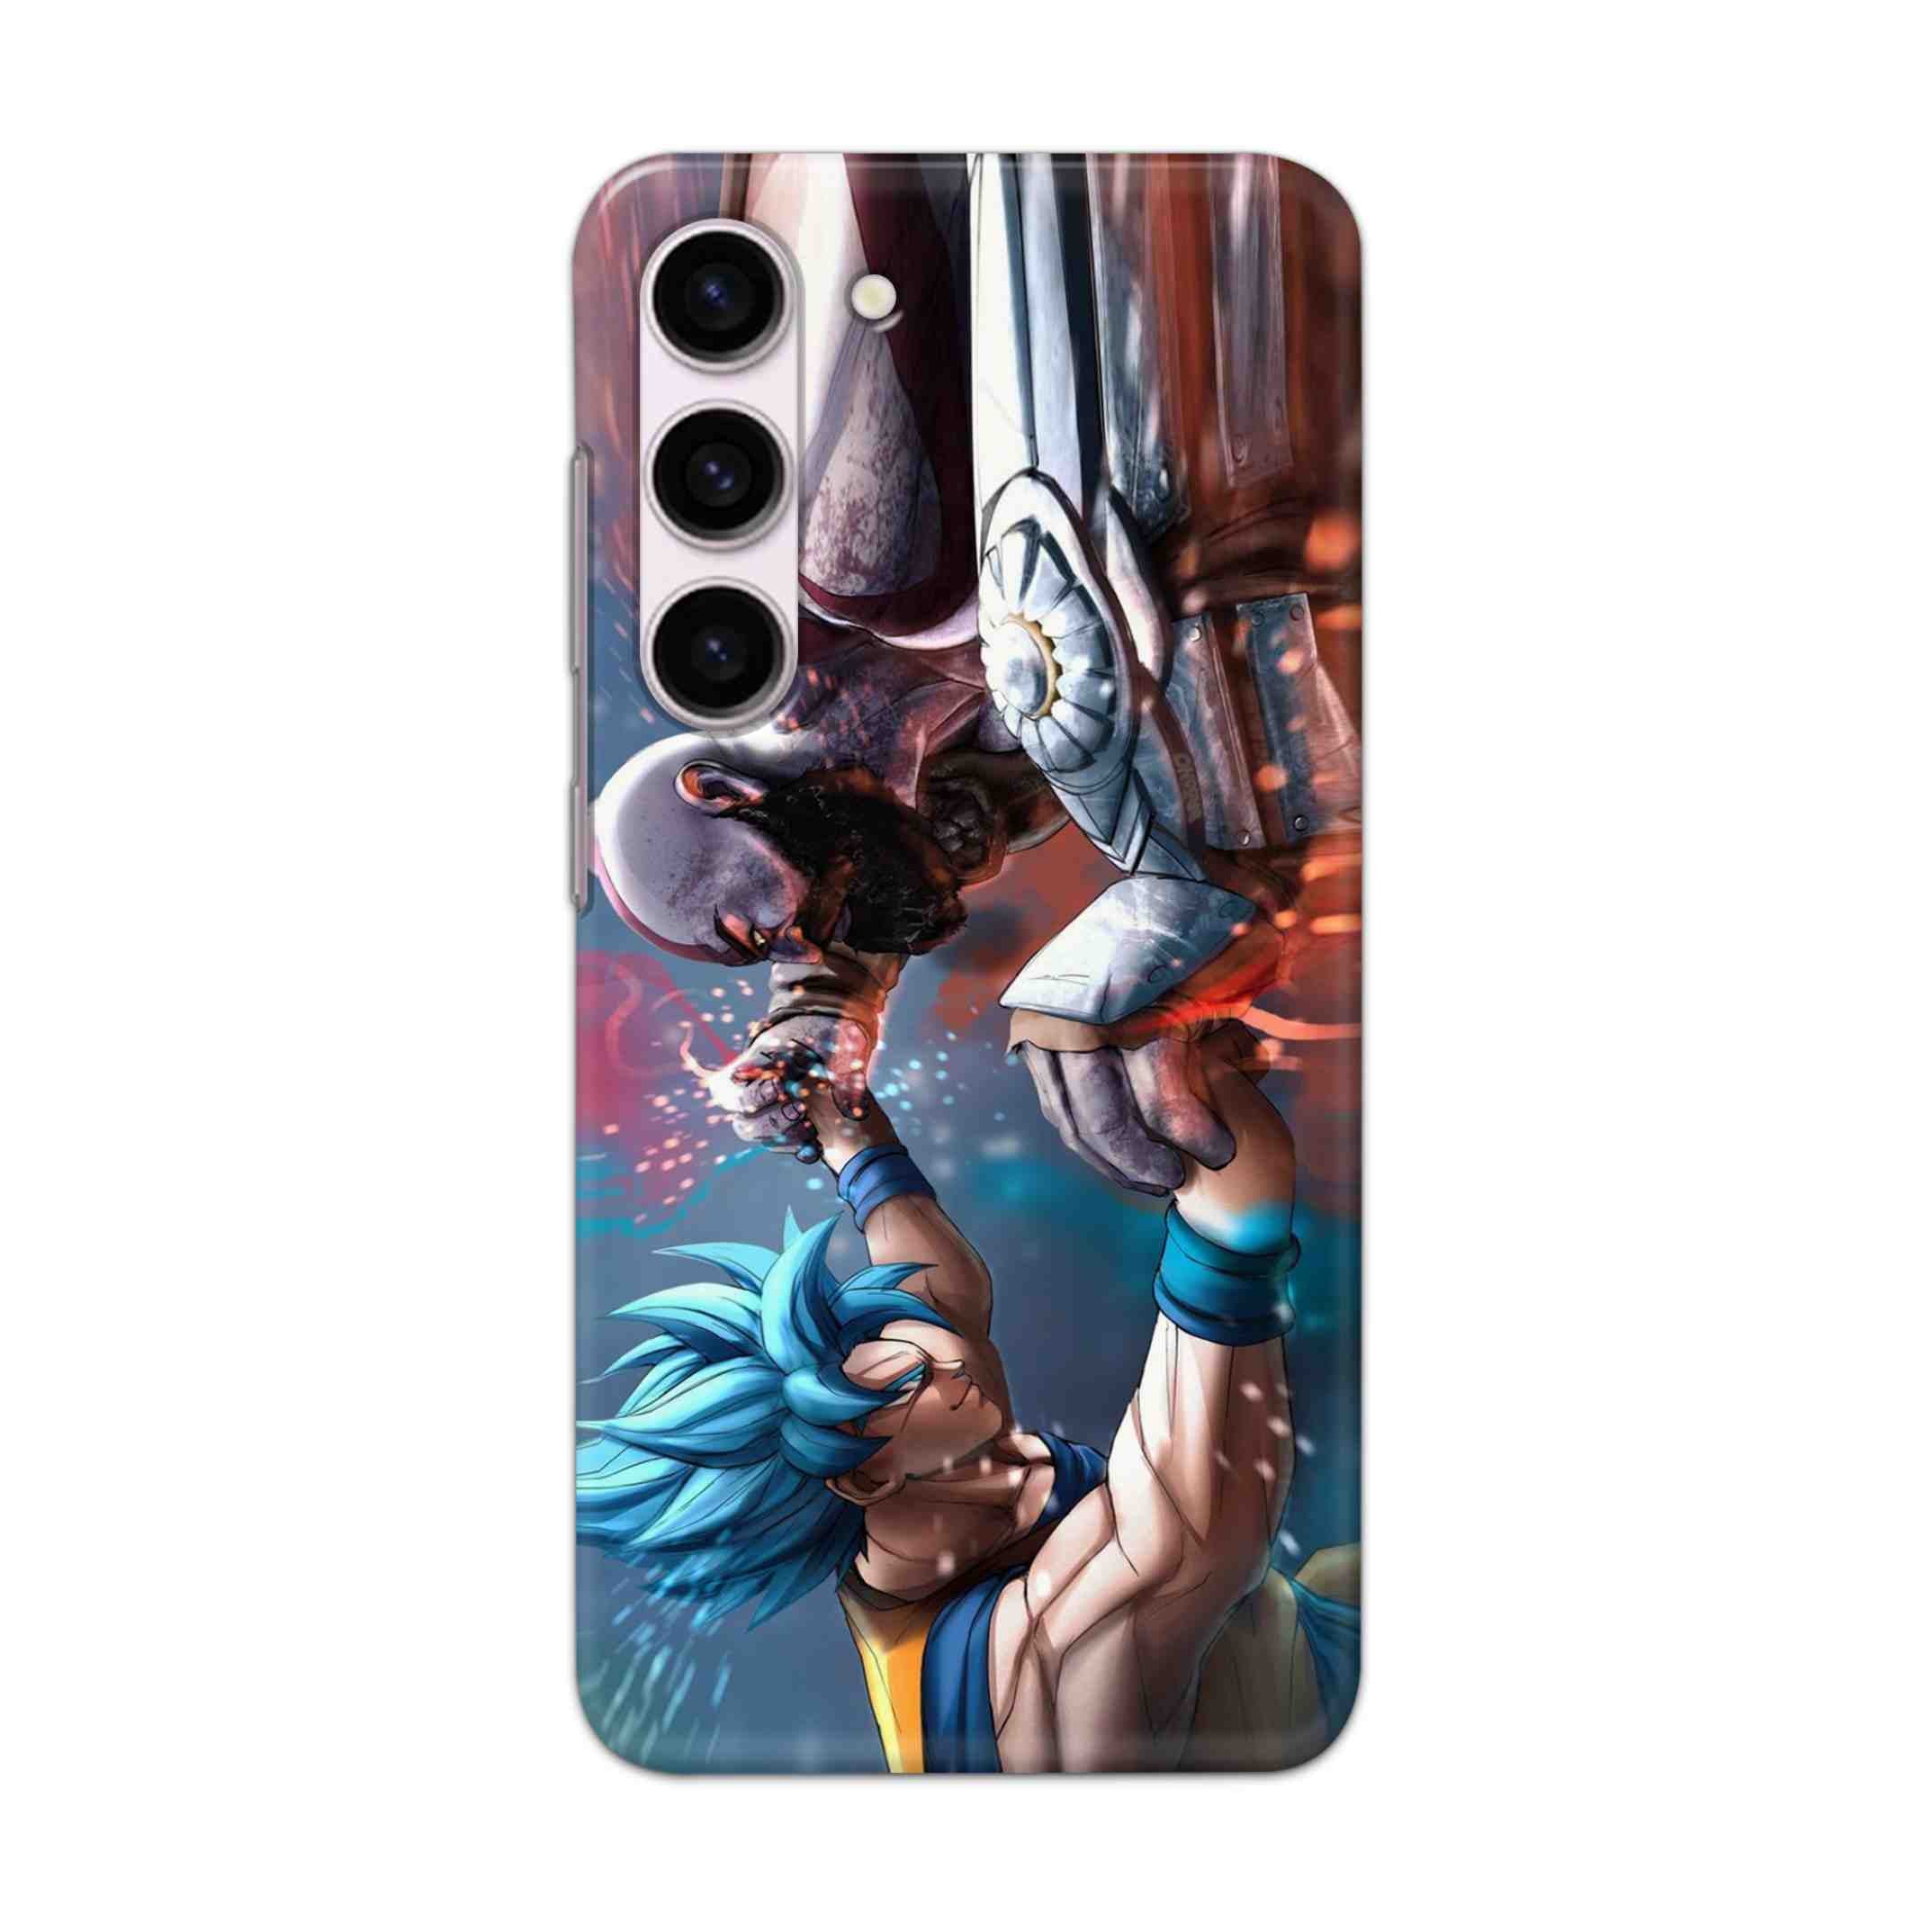 Buy Goku Vs Kratos Hard Back Mobile Phone Case Cover For Samsung Galaxy S23 Online